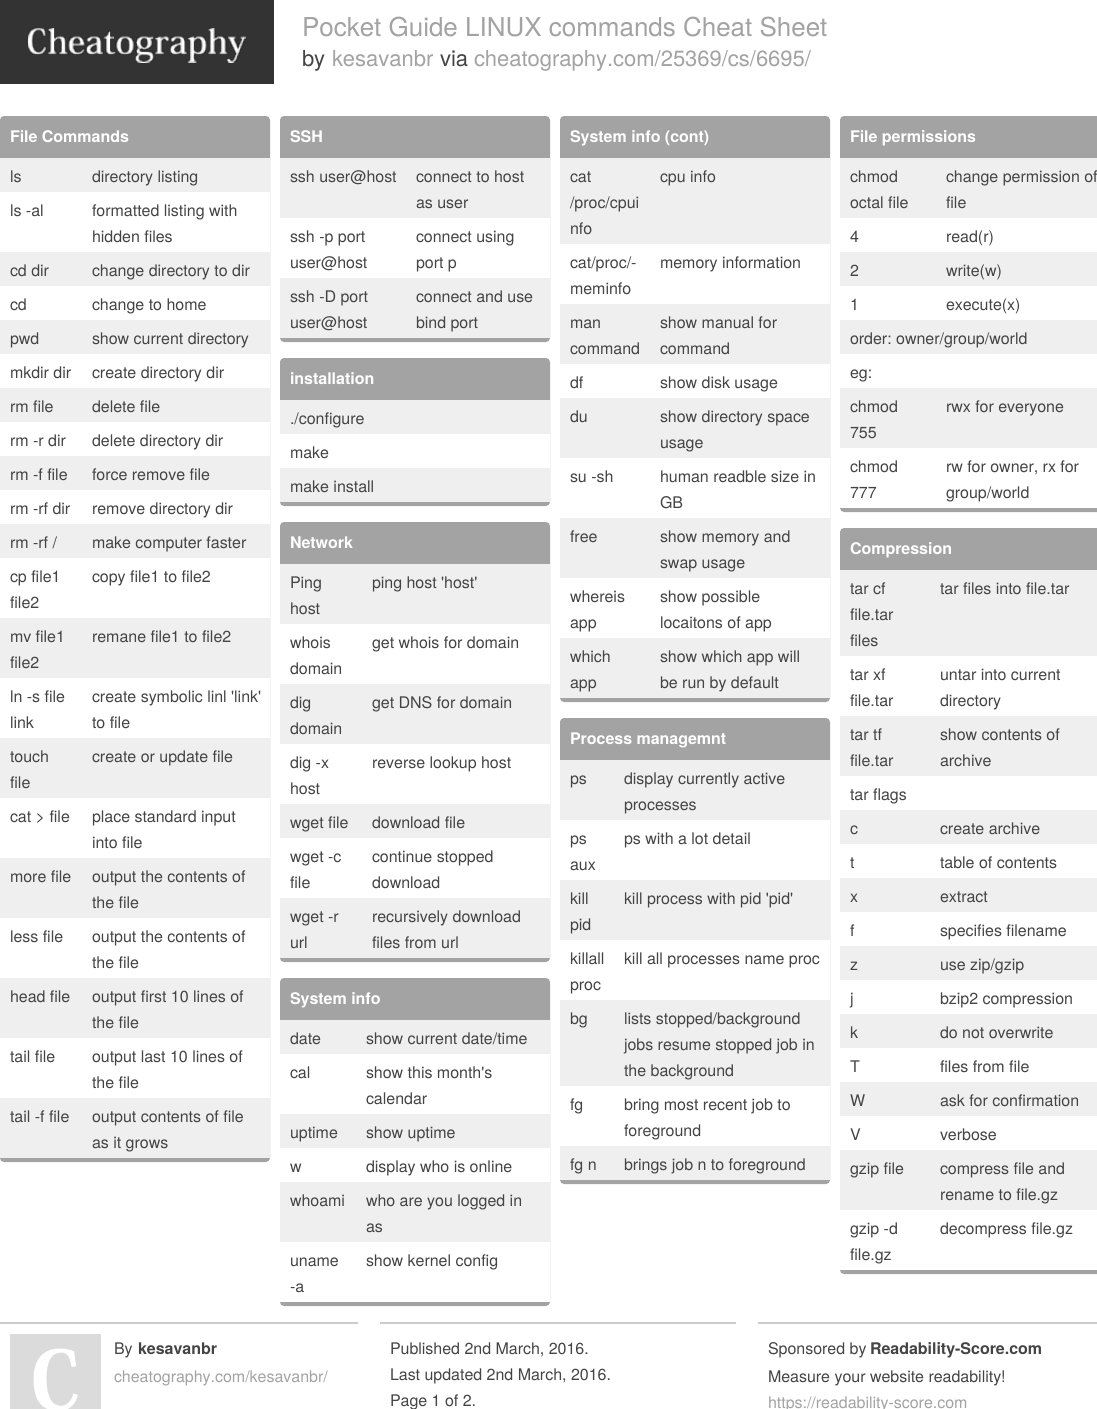 Page 1 of 2 - Pocket Guide LINUX Commands Cheat Sheet By Kesavanbr - Cheatography.com